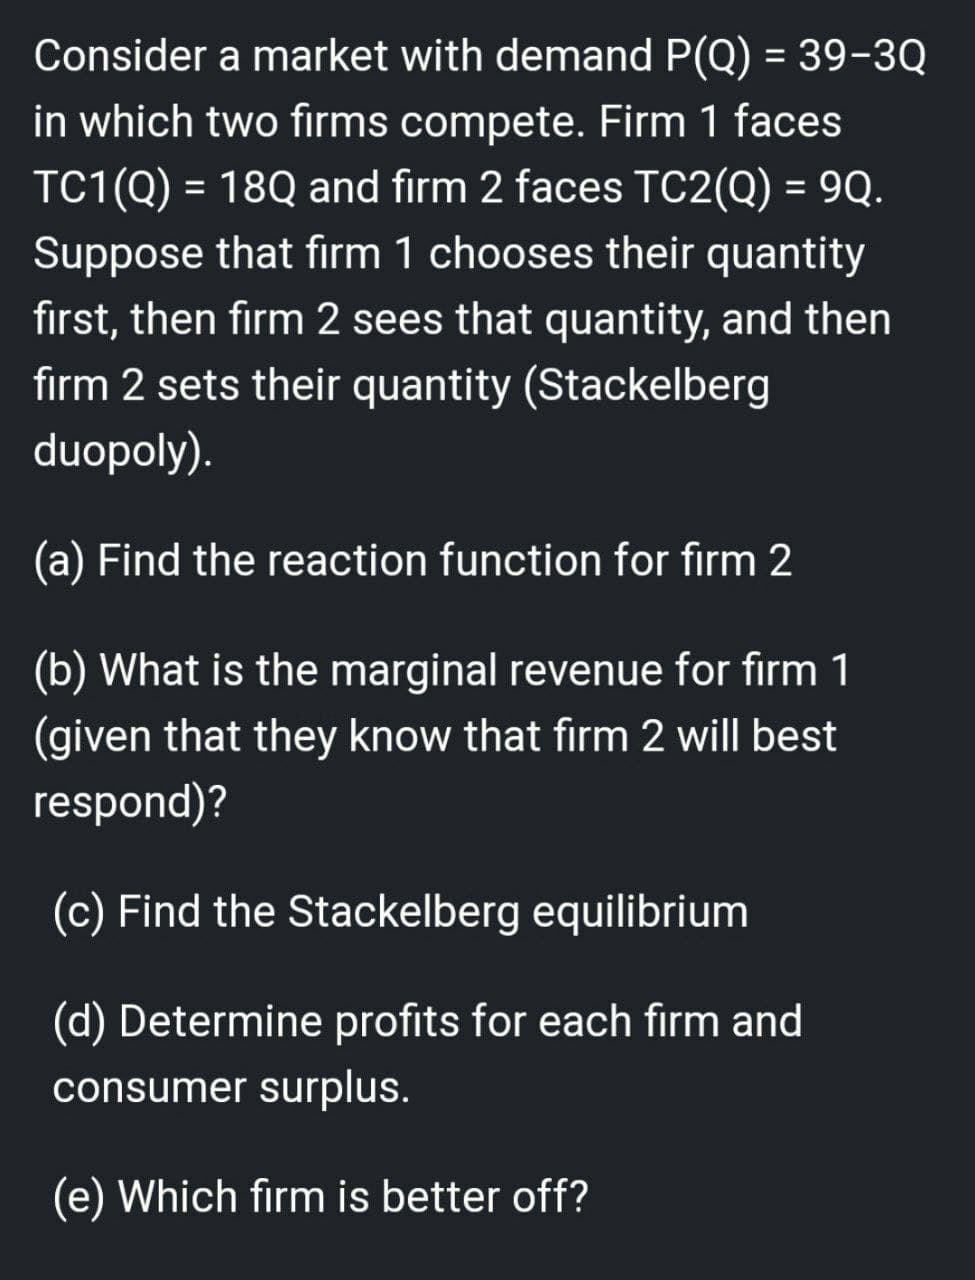 Consider a market with demand P(Q) = 39-3Q
in which two firms compete. Firm 1 faces
TC1(Q) = 18Q and firm 2 faces TC2(Q) = 9Q.
Suppose that firm 1 chooses their quantity
first, then firm 2 sees that quantity, and then
firm 2 sets their quantity (Stackelberg
duopoly).
(a) Find the reaction function for firm 2
(b) What is the marginal revenue for firm 1
(given that they know that firm 2 will best
respond)?
(c) Find the Stackelberg equilibrium
(d) Determine profits for each firm and
consumer surplus.
(e) Which firm is better off?